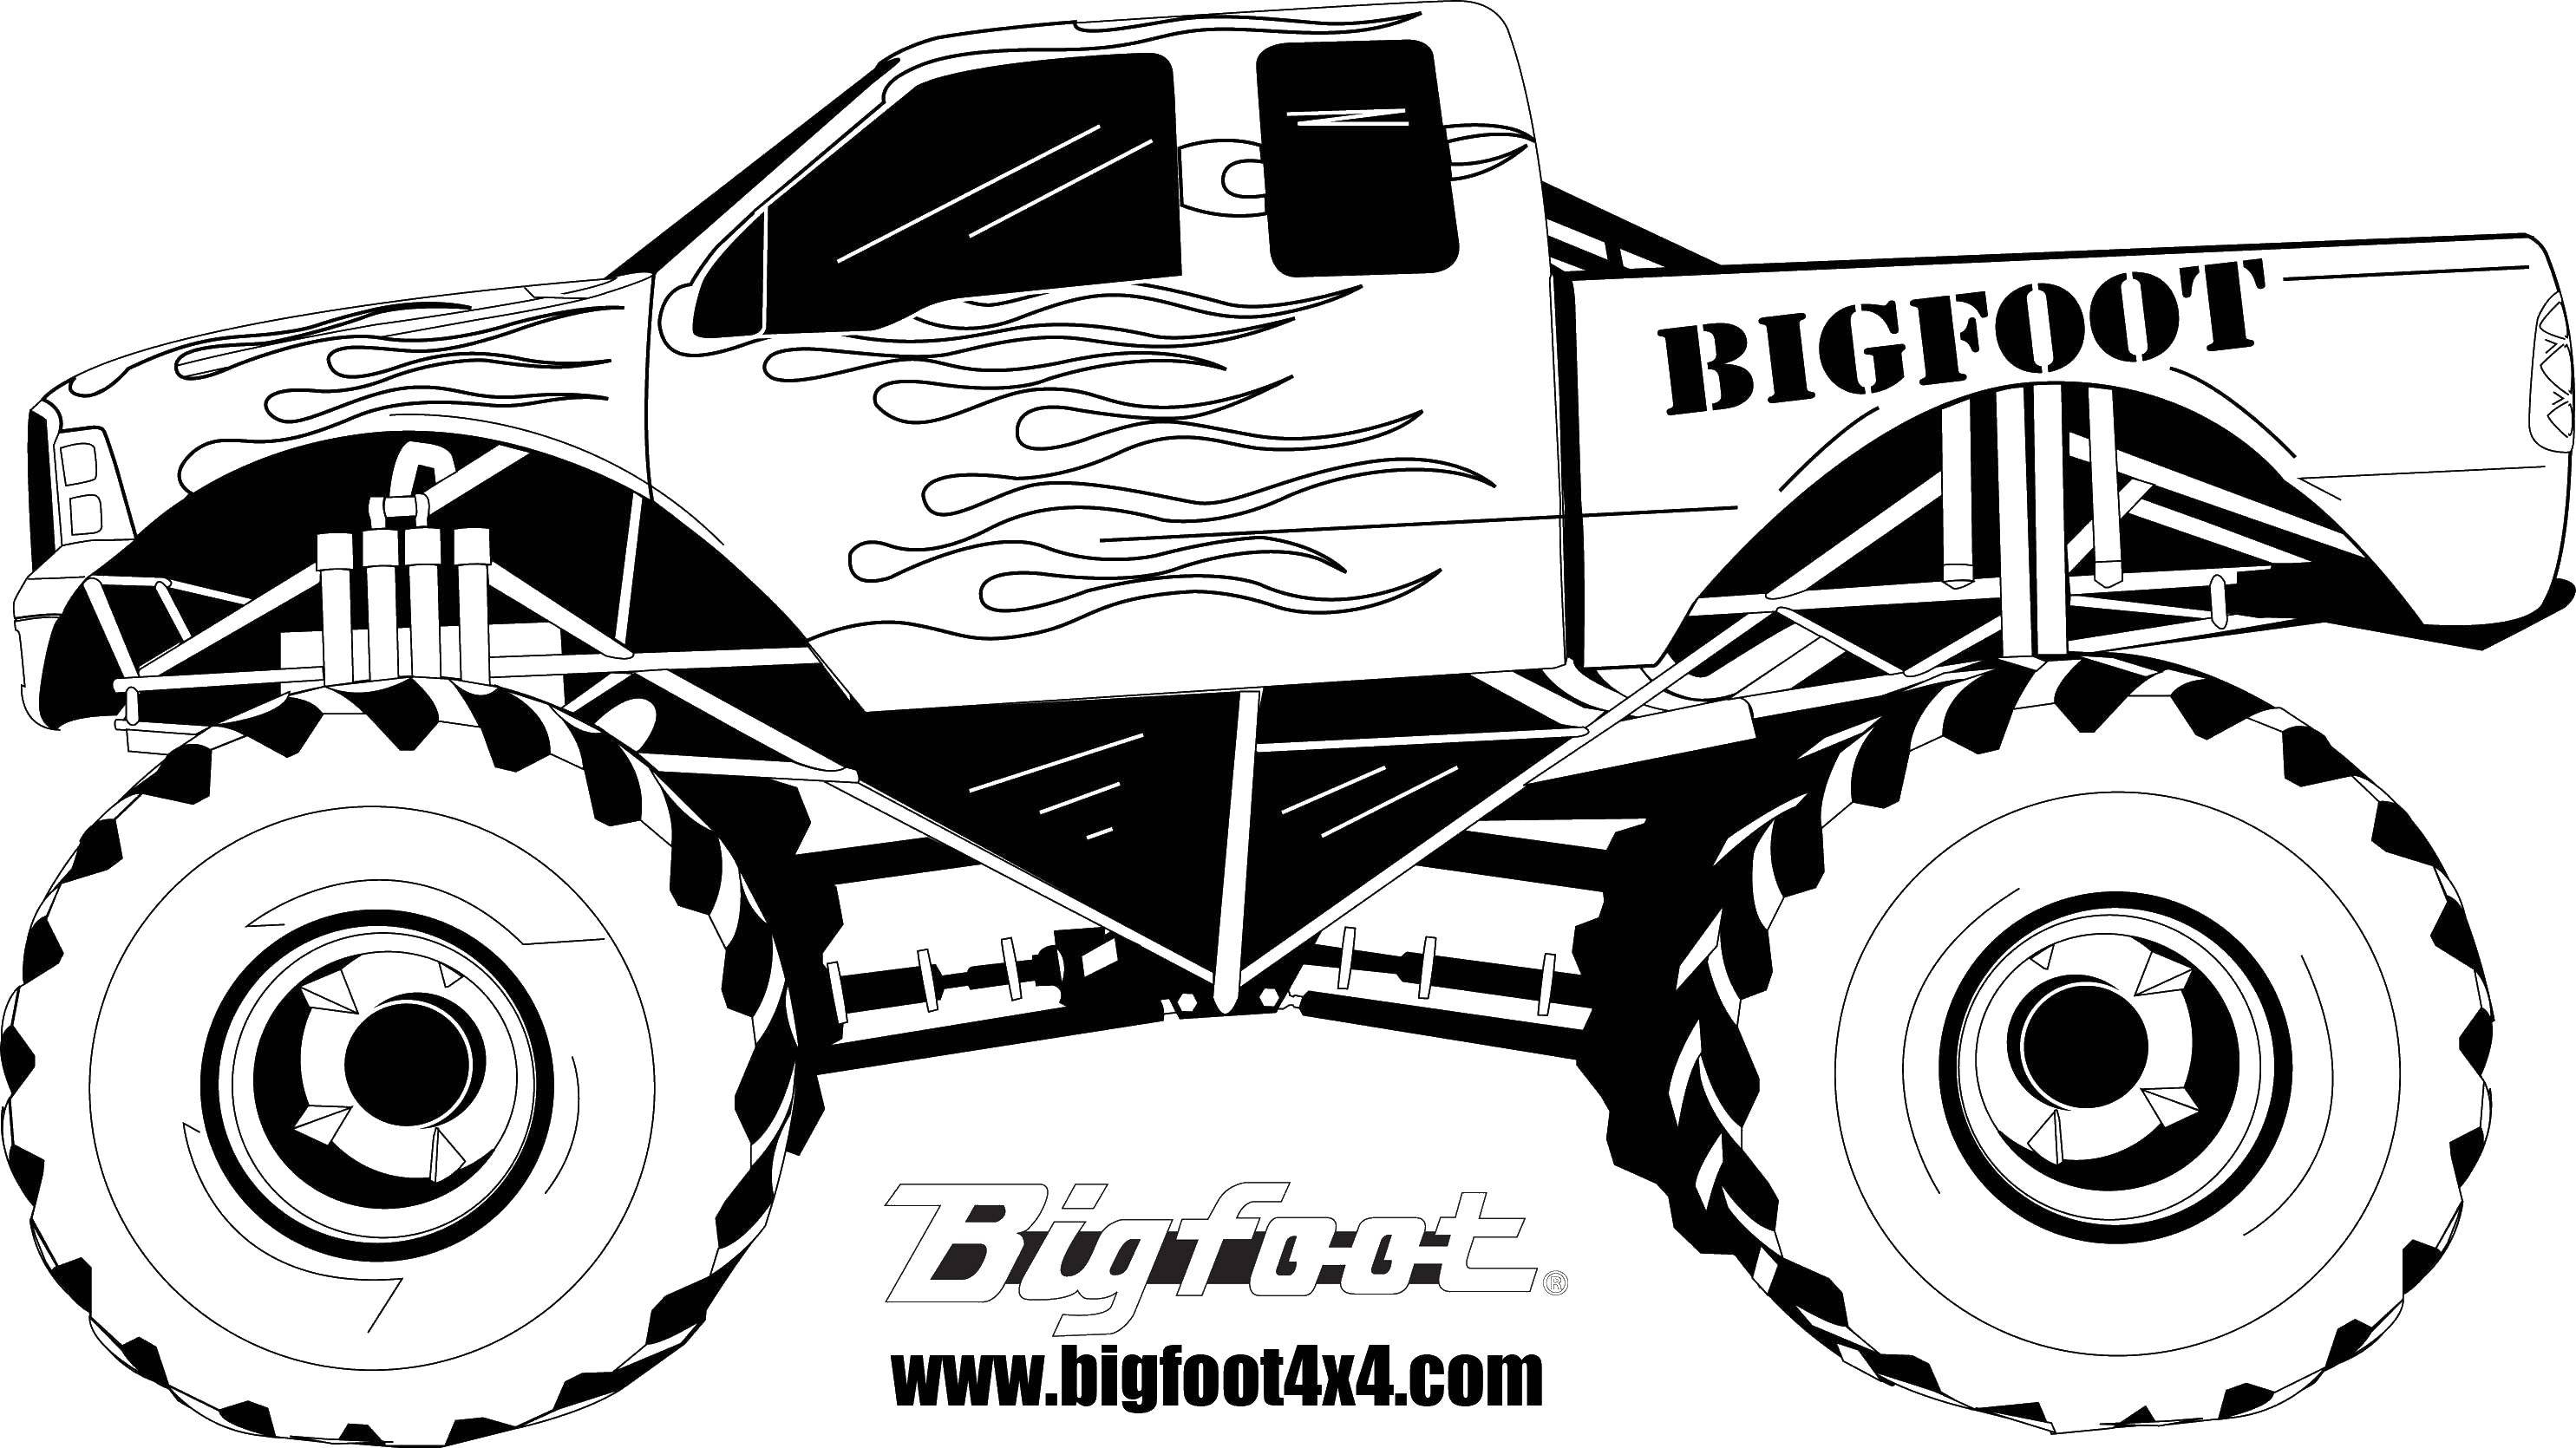 Coloring Bigfoot. Category Monsters. Tags:  monsters, cars, jeeps.